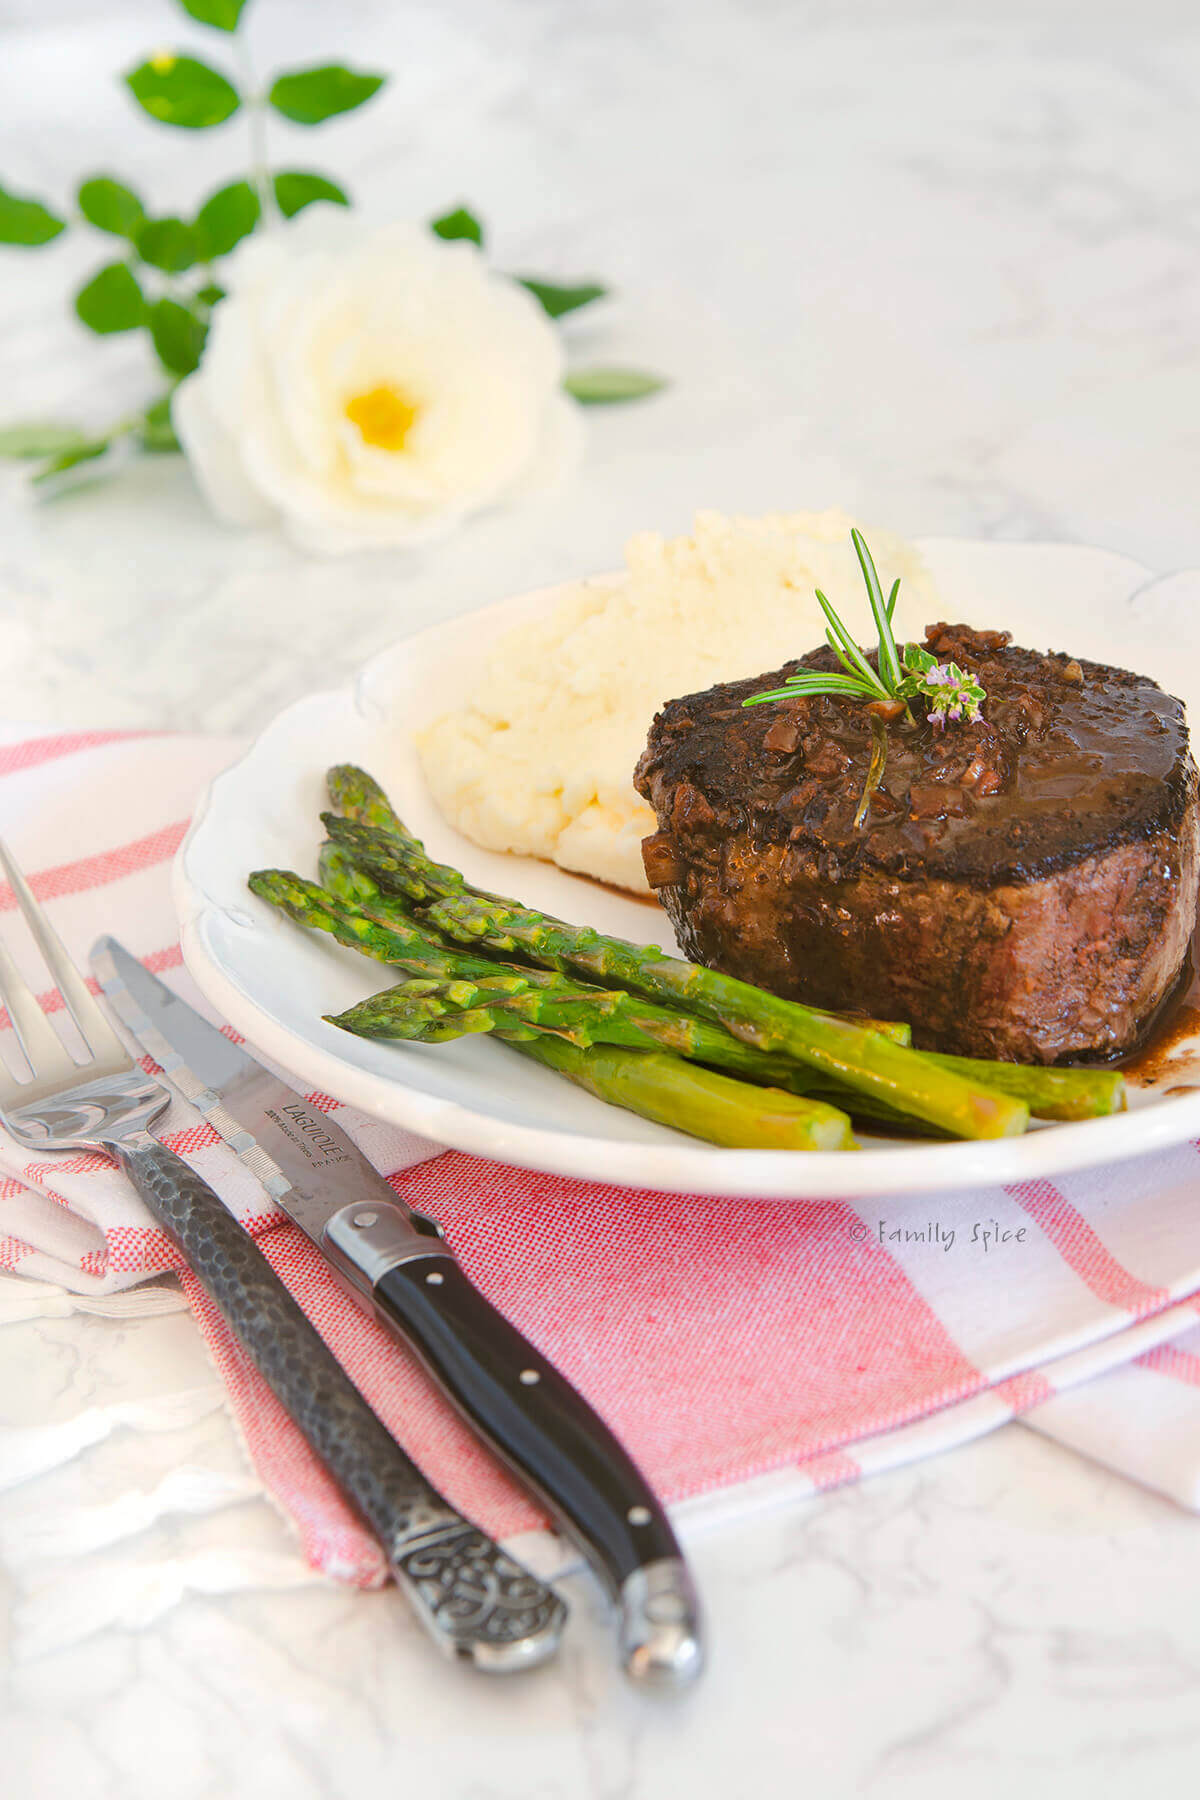 A plate with filet mignon, asparagus and mashed potatoes